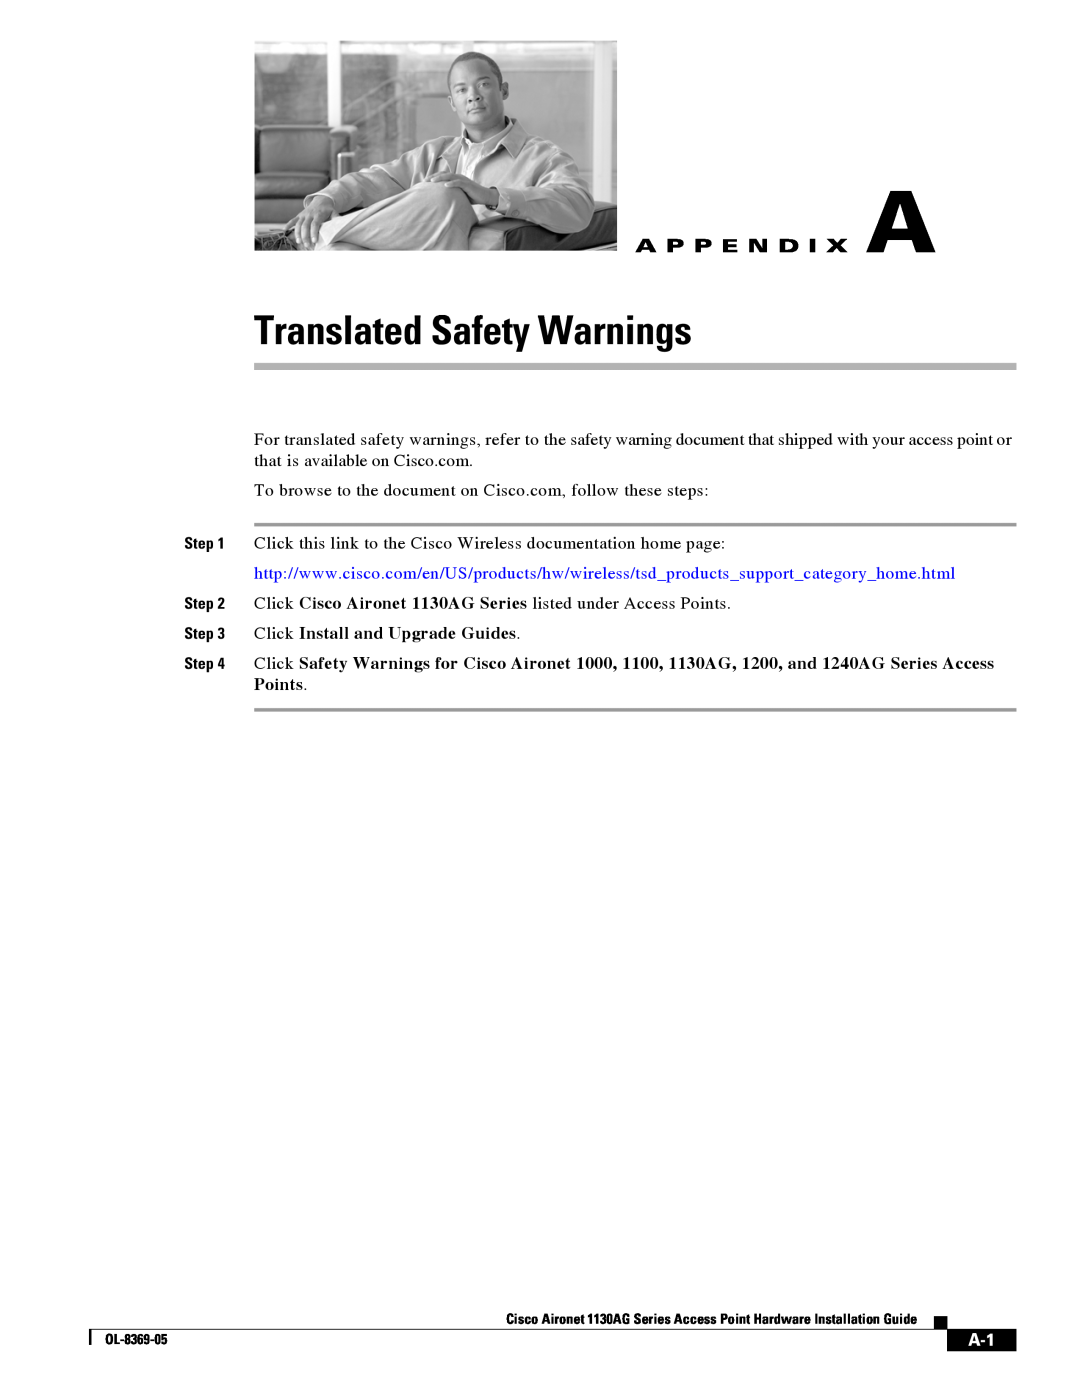 Cisco Systems 1130AG manual Translated Safety Warnings, A P P E N D I X A 